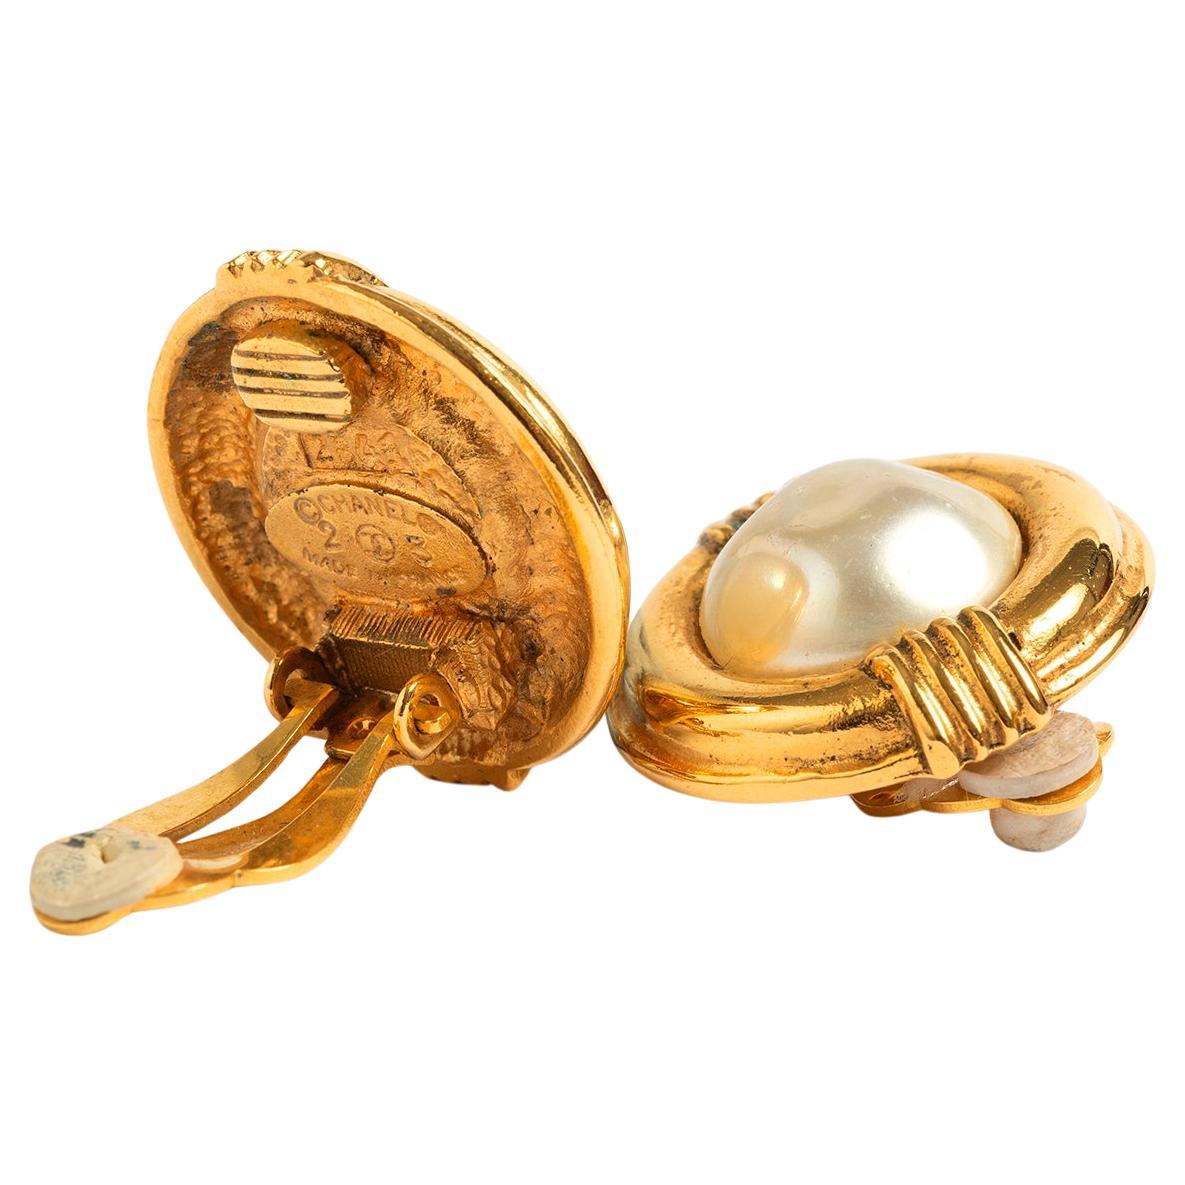 Our vintage Chanel earrings feature a gold metal base and clip with simulated pearl centre. These are early Chanel costume jewellery, stamped 23 2641, dating from season 24 in 1984, designed by Victoire d Castellane under the brand direction of Karl